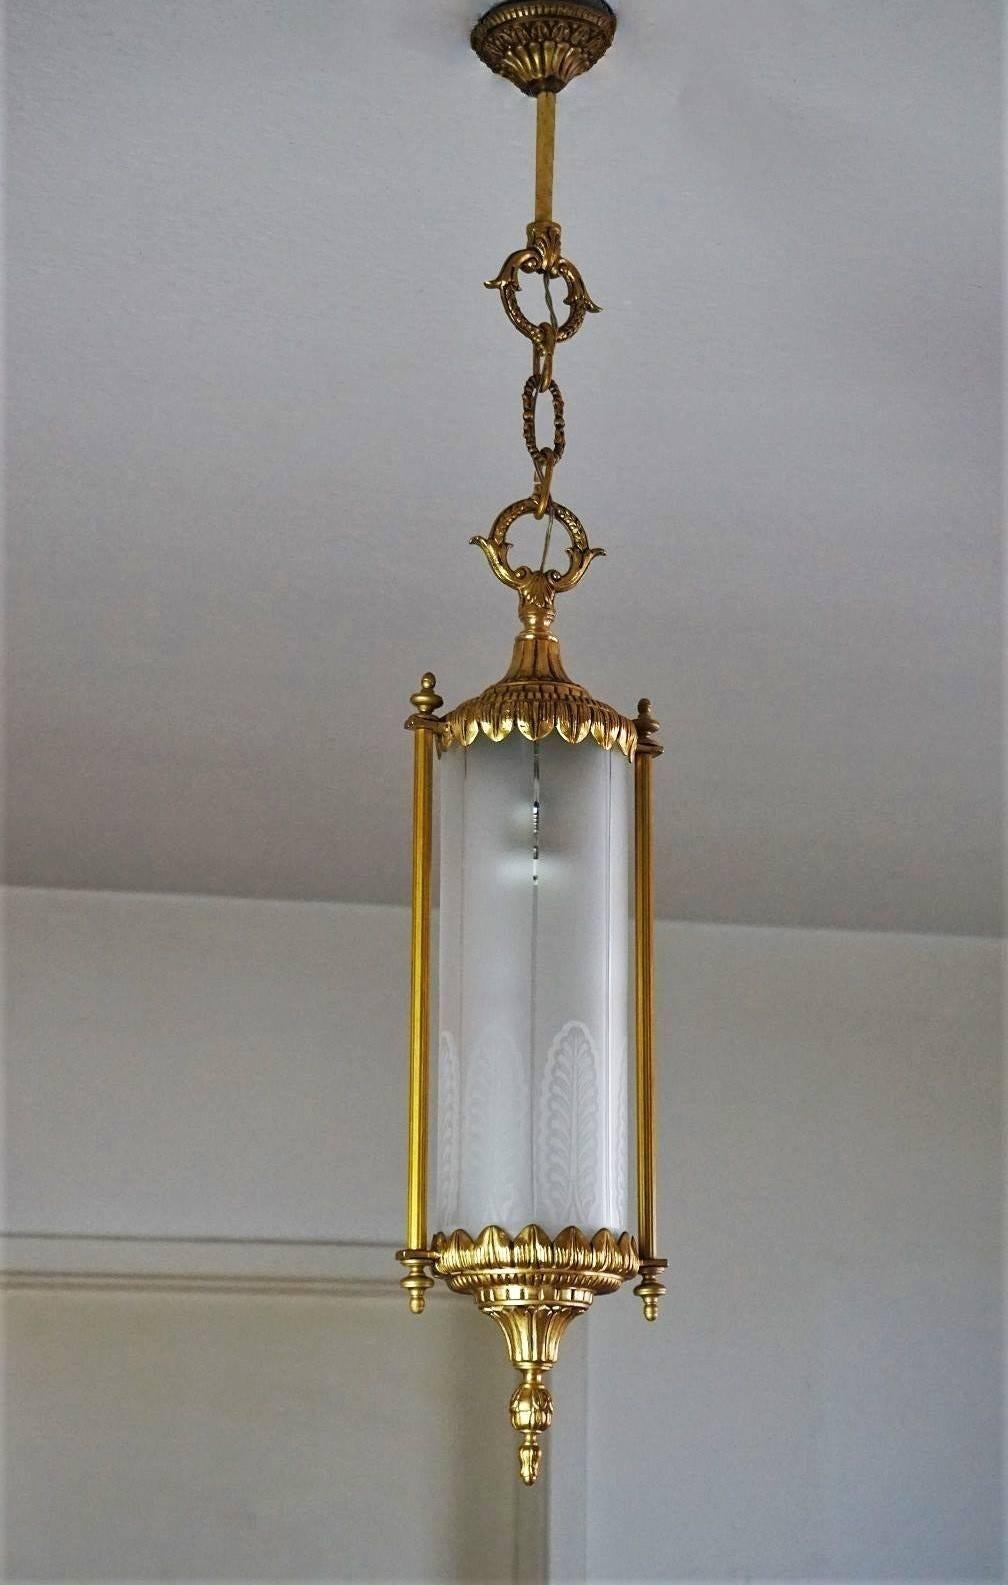 French gilt bronze and etched glass cylinder lantern, chandelier, pendant in Art Nouveau style, circa 1930

 One large lamp socket

Measure: Height 30 ¾ in (78 cm) 
Diameter 6.30 in (16 cm)

Please also see pictures for more details and entire